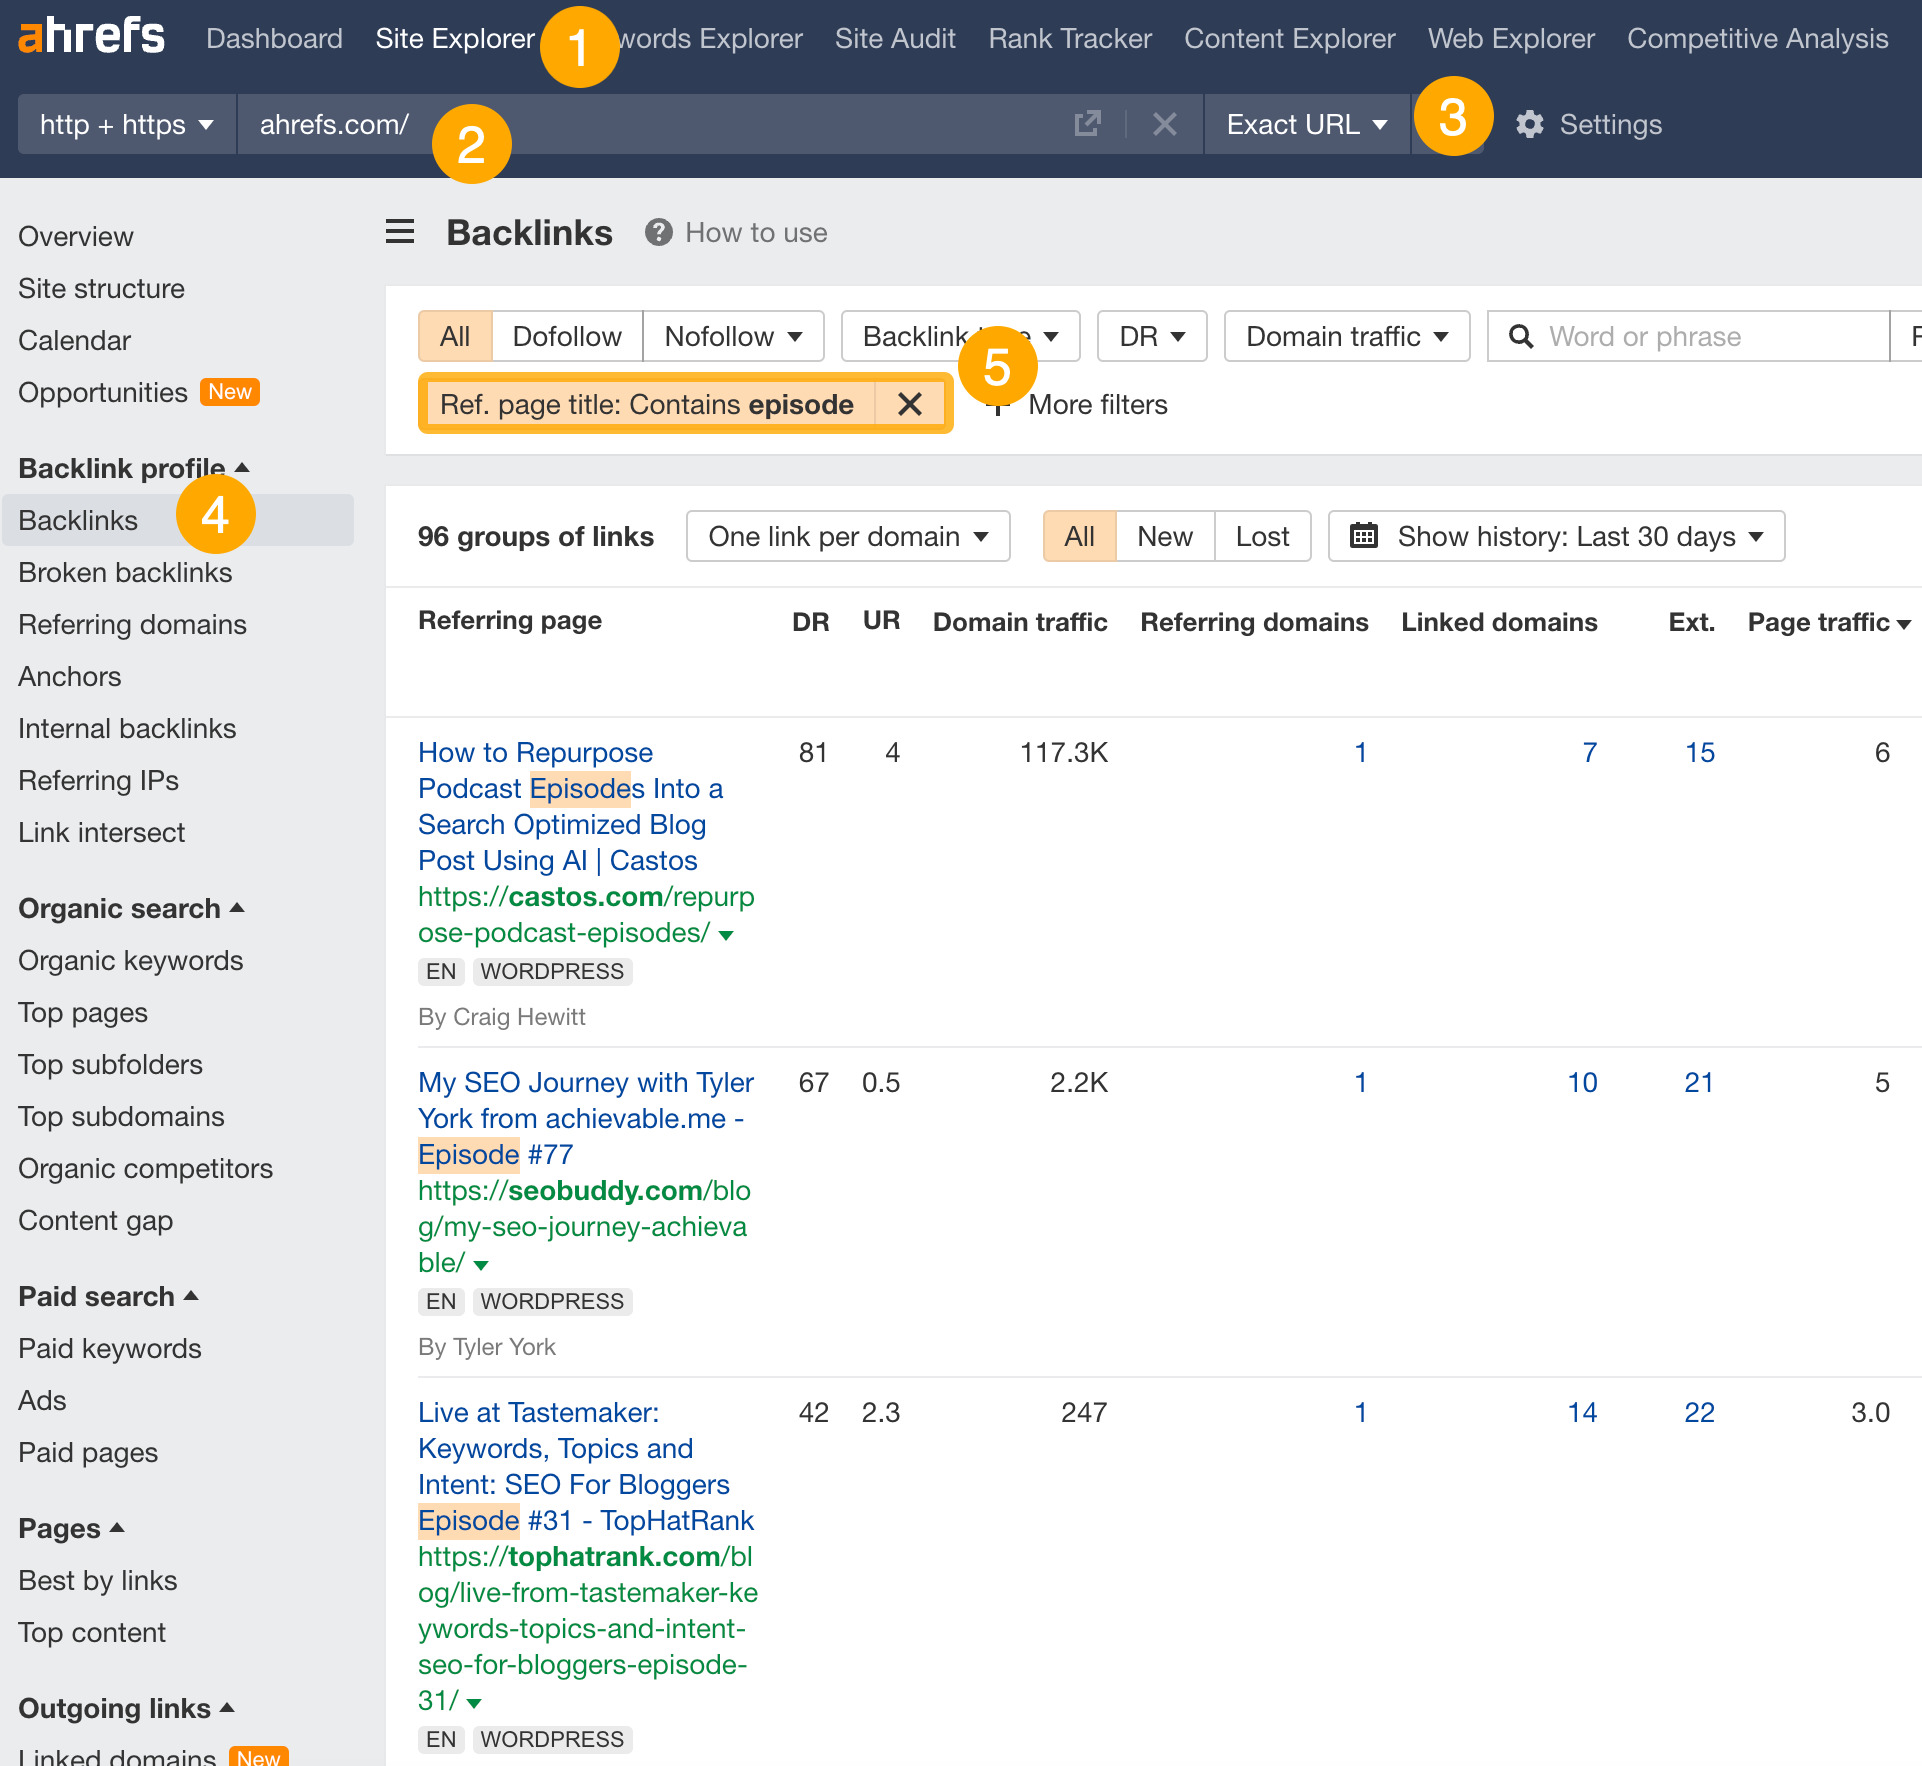 Finding podcast opportunities using Ahrefs' Site Explorer
